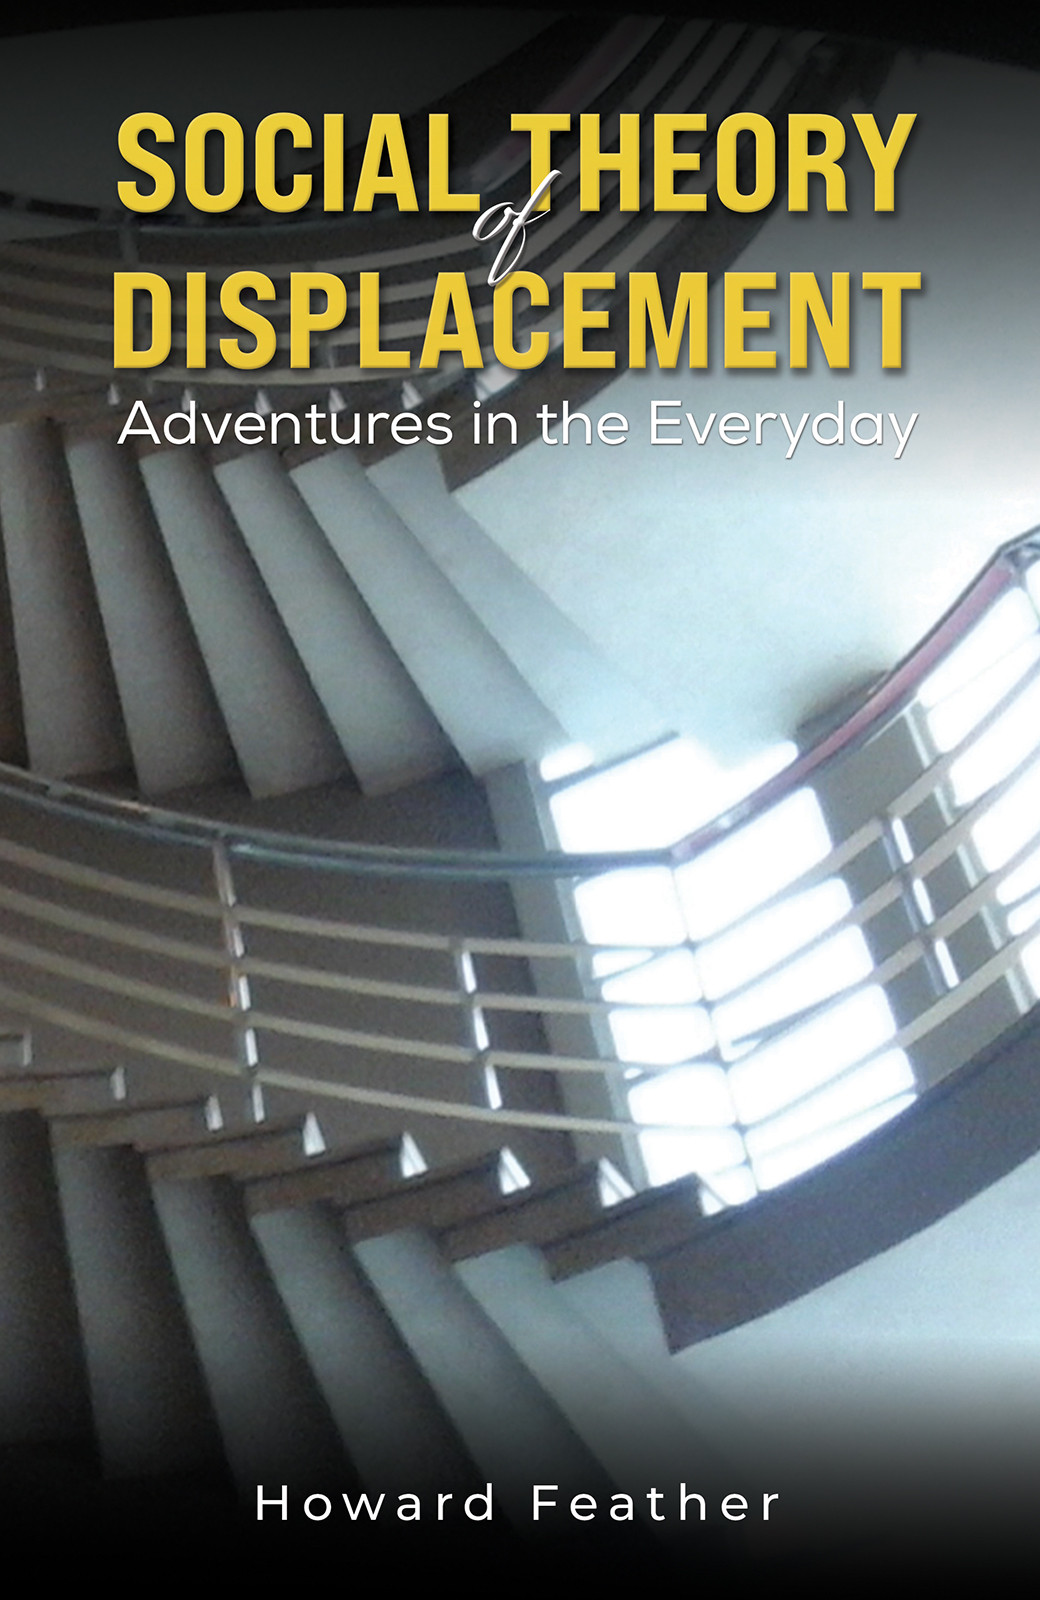 Social Theory of Displacement: Adventures in the Everyday-bookcover